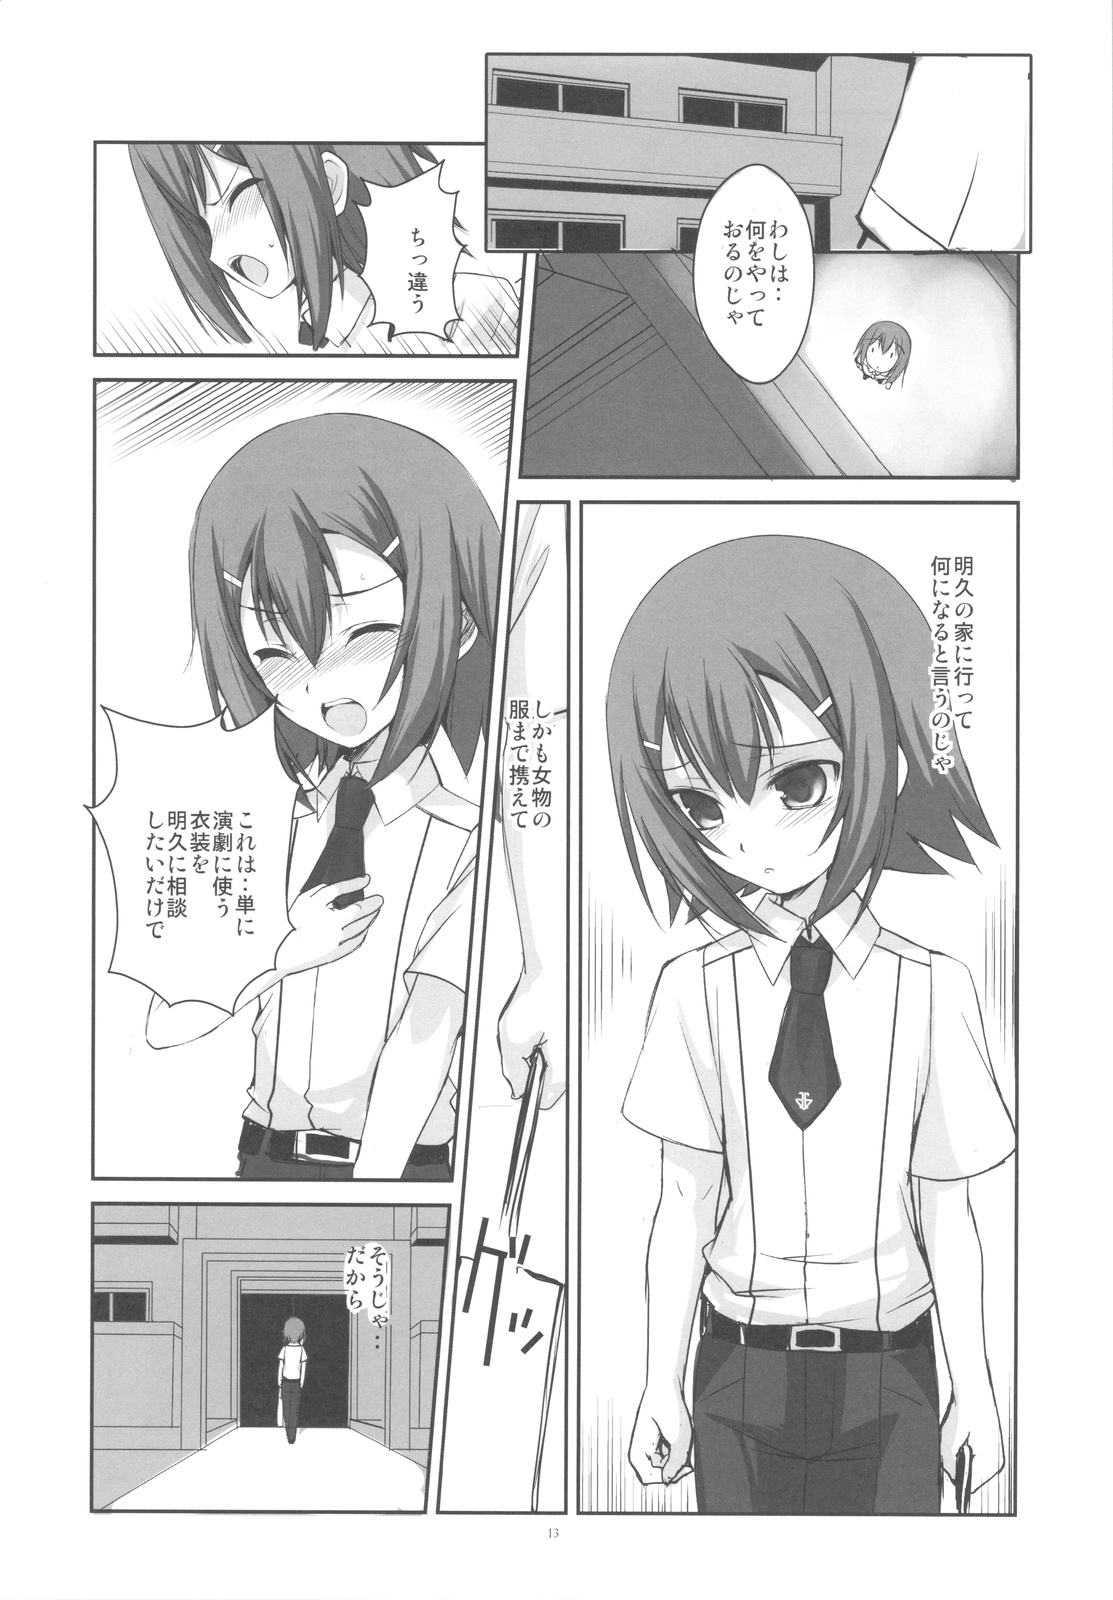 (COMIC1☆4) [R-WORKS] LOVE IS GAME OVER (Baka to Test to Shoukanjuu) page 13 full